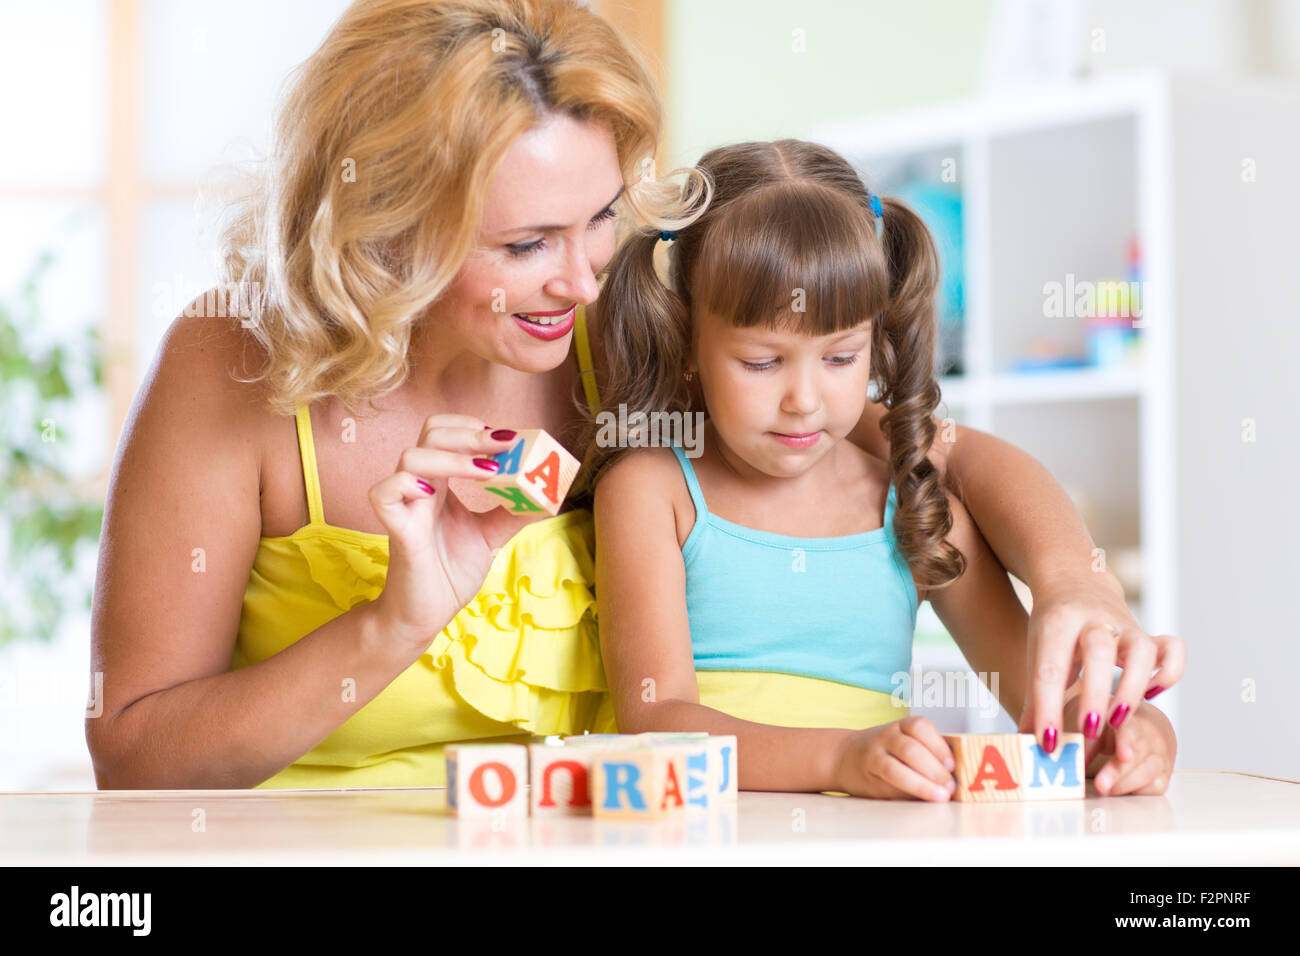 kid and mother building the word mama playing wooden cubes Stock Photo